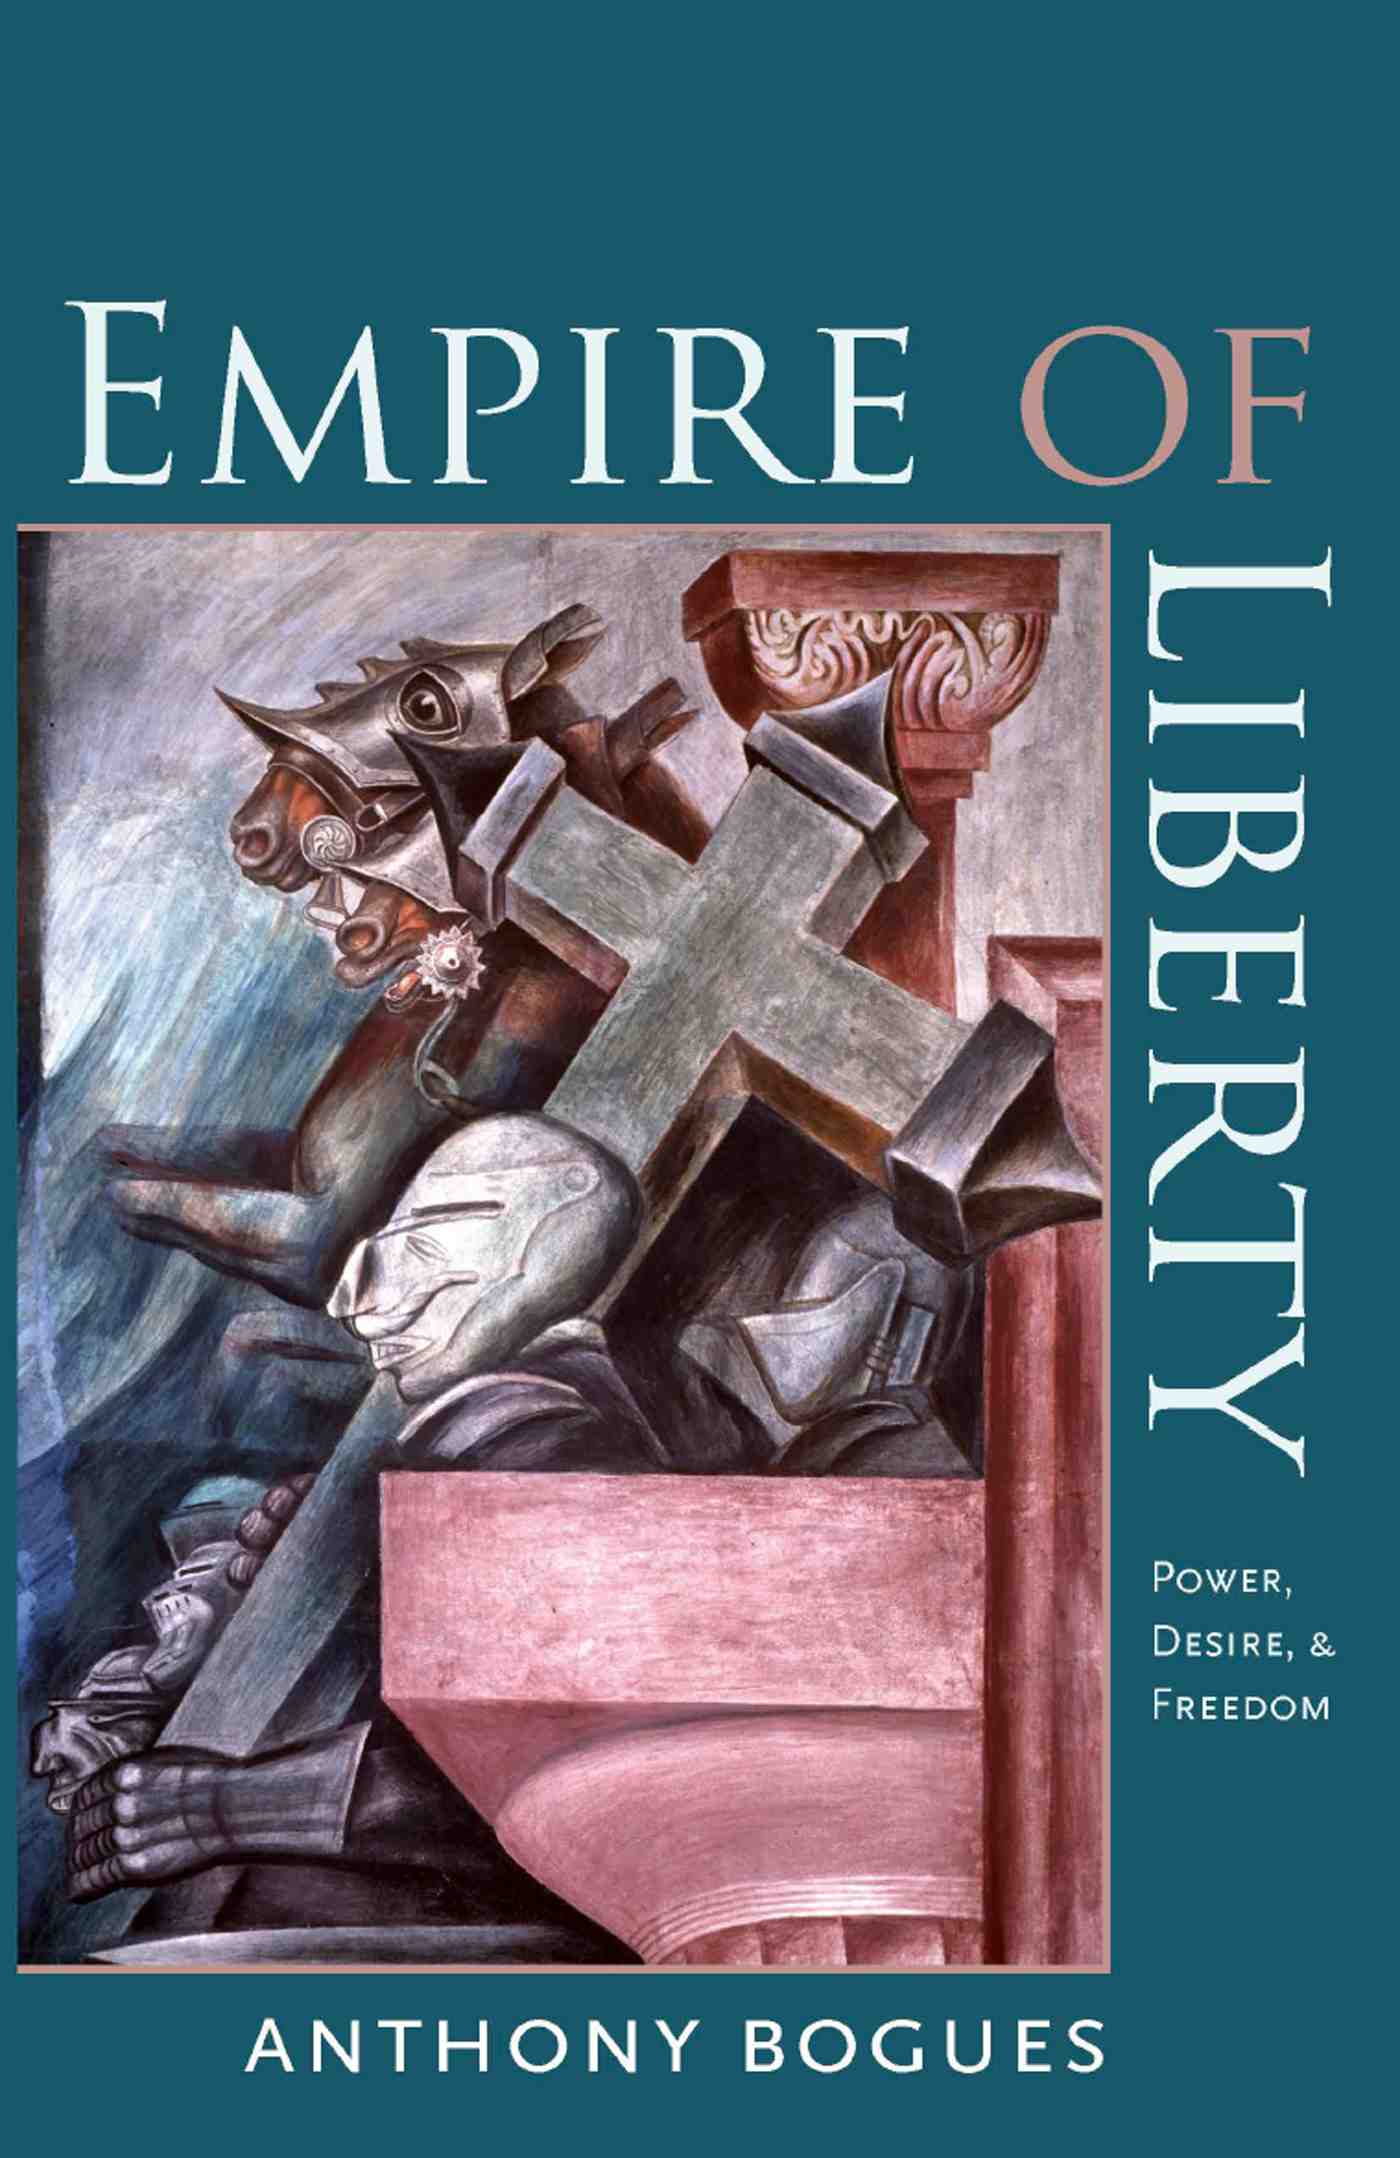 Empire of Liberty cover